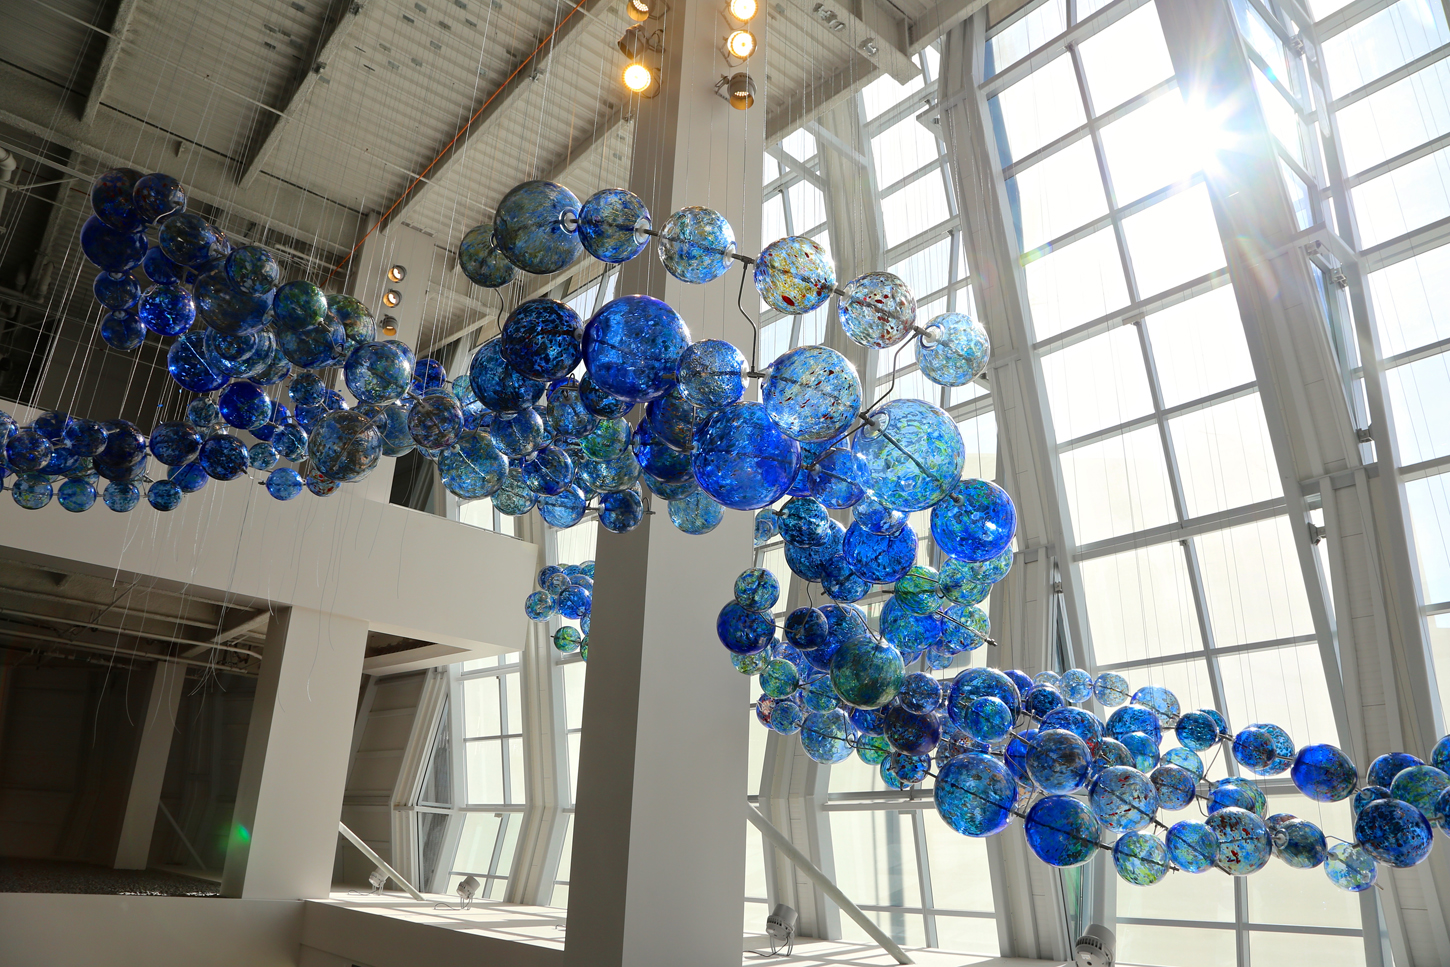 Multitudes Converge | 22' X 36' X 55' | Glass, Stainless Steel, Silicon | 2016 || Photo by Joan Cusick